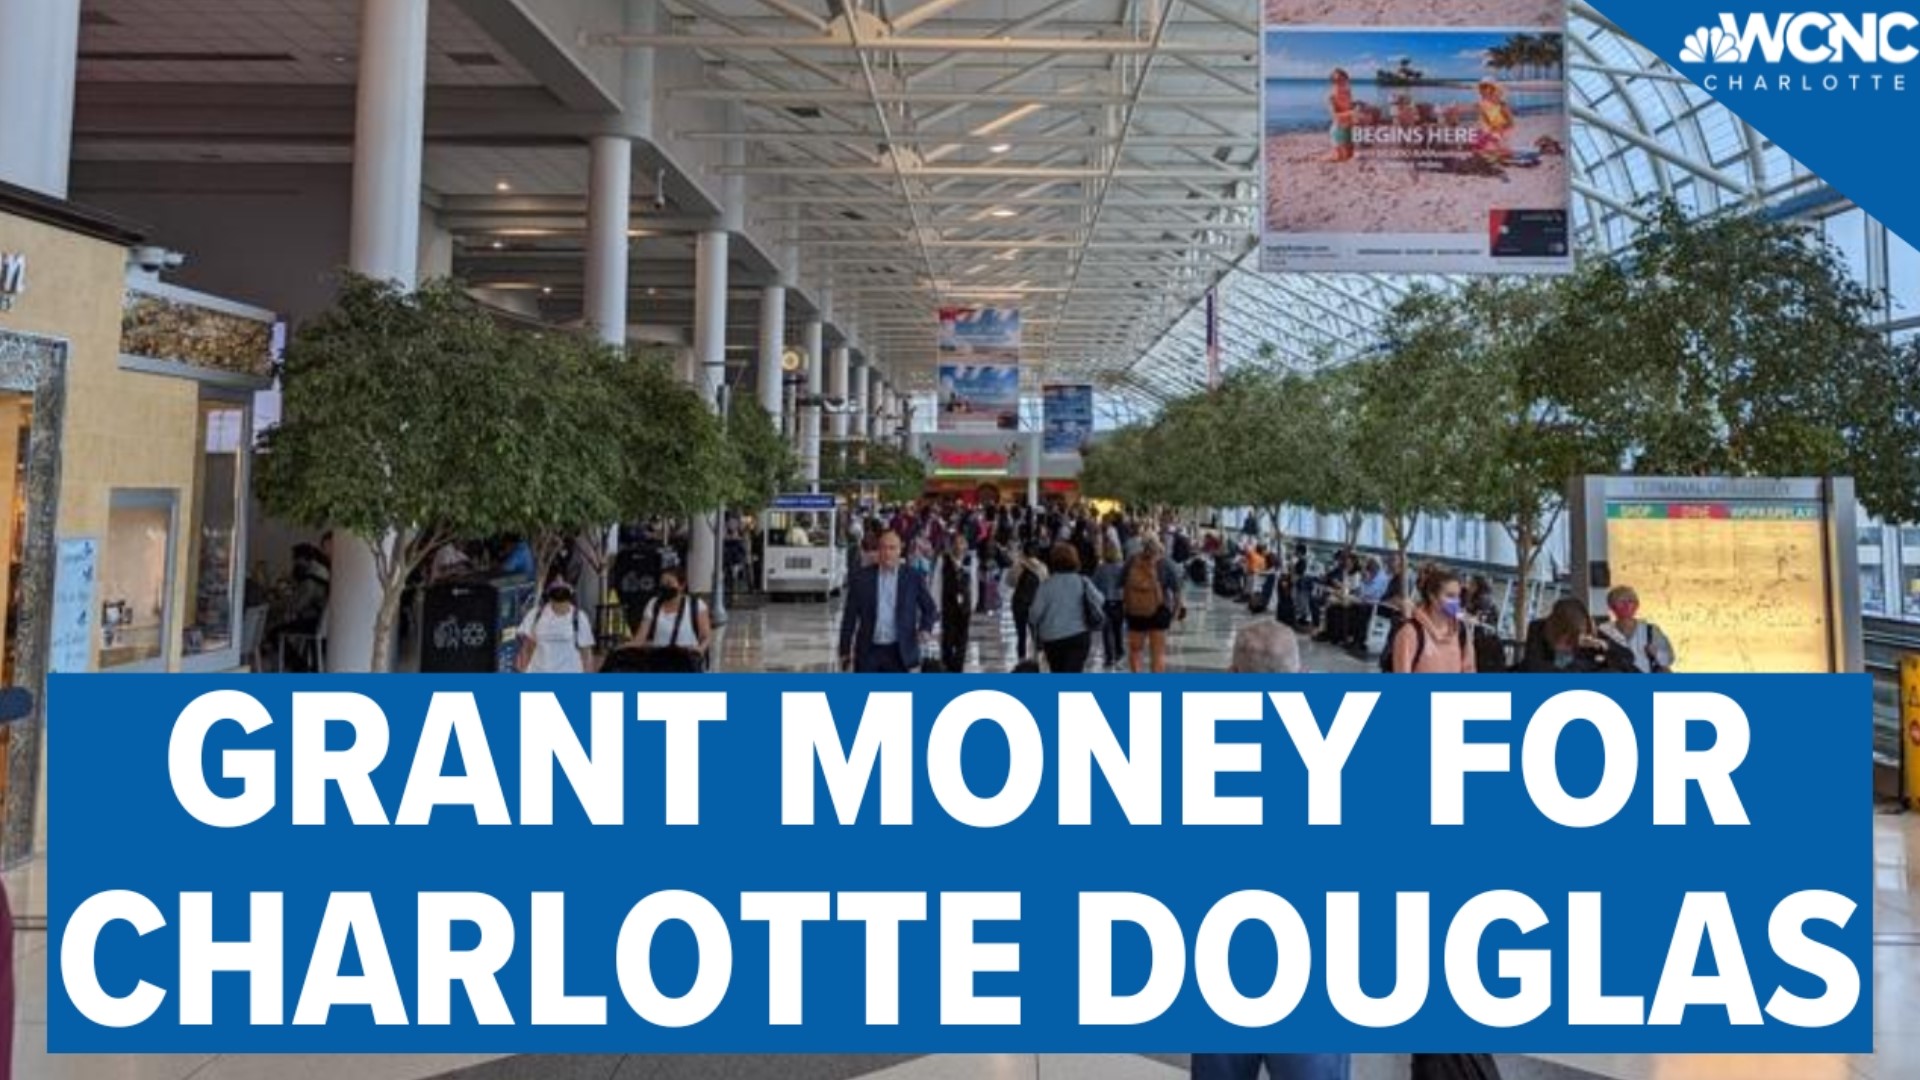 Charlotte Douglas International Airport will receive $32 million in federal funding for improvements to Concourse E, U.S. Rep. Jeff Jackson announced.